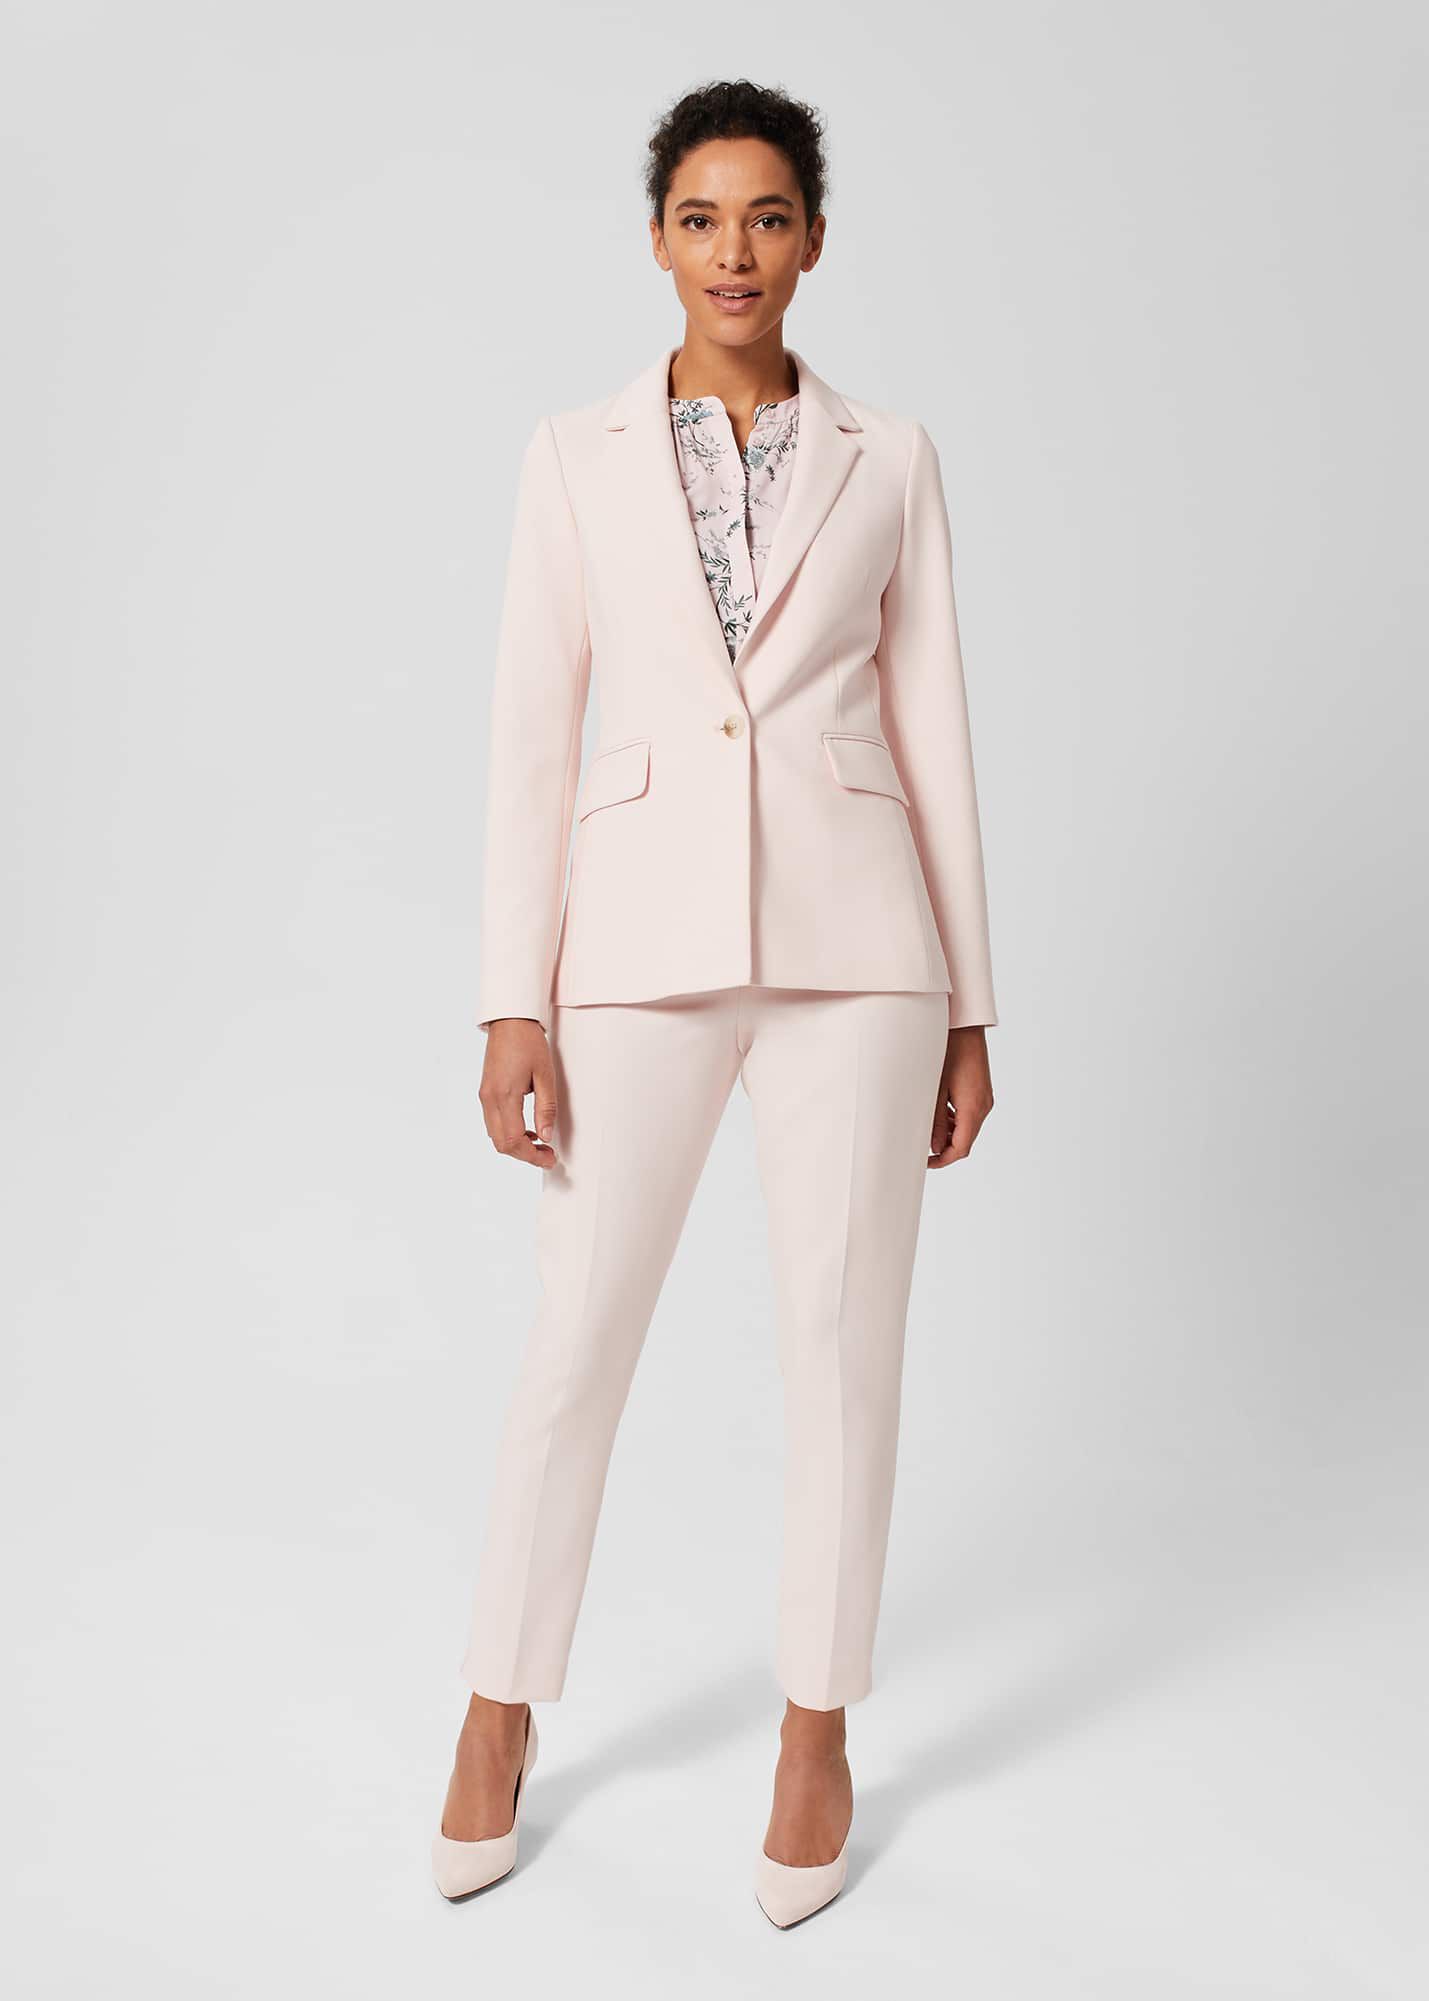 Fashion Official trouser suit price from jumia in Kenya  Yaoota